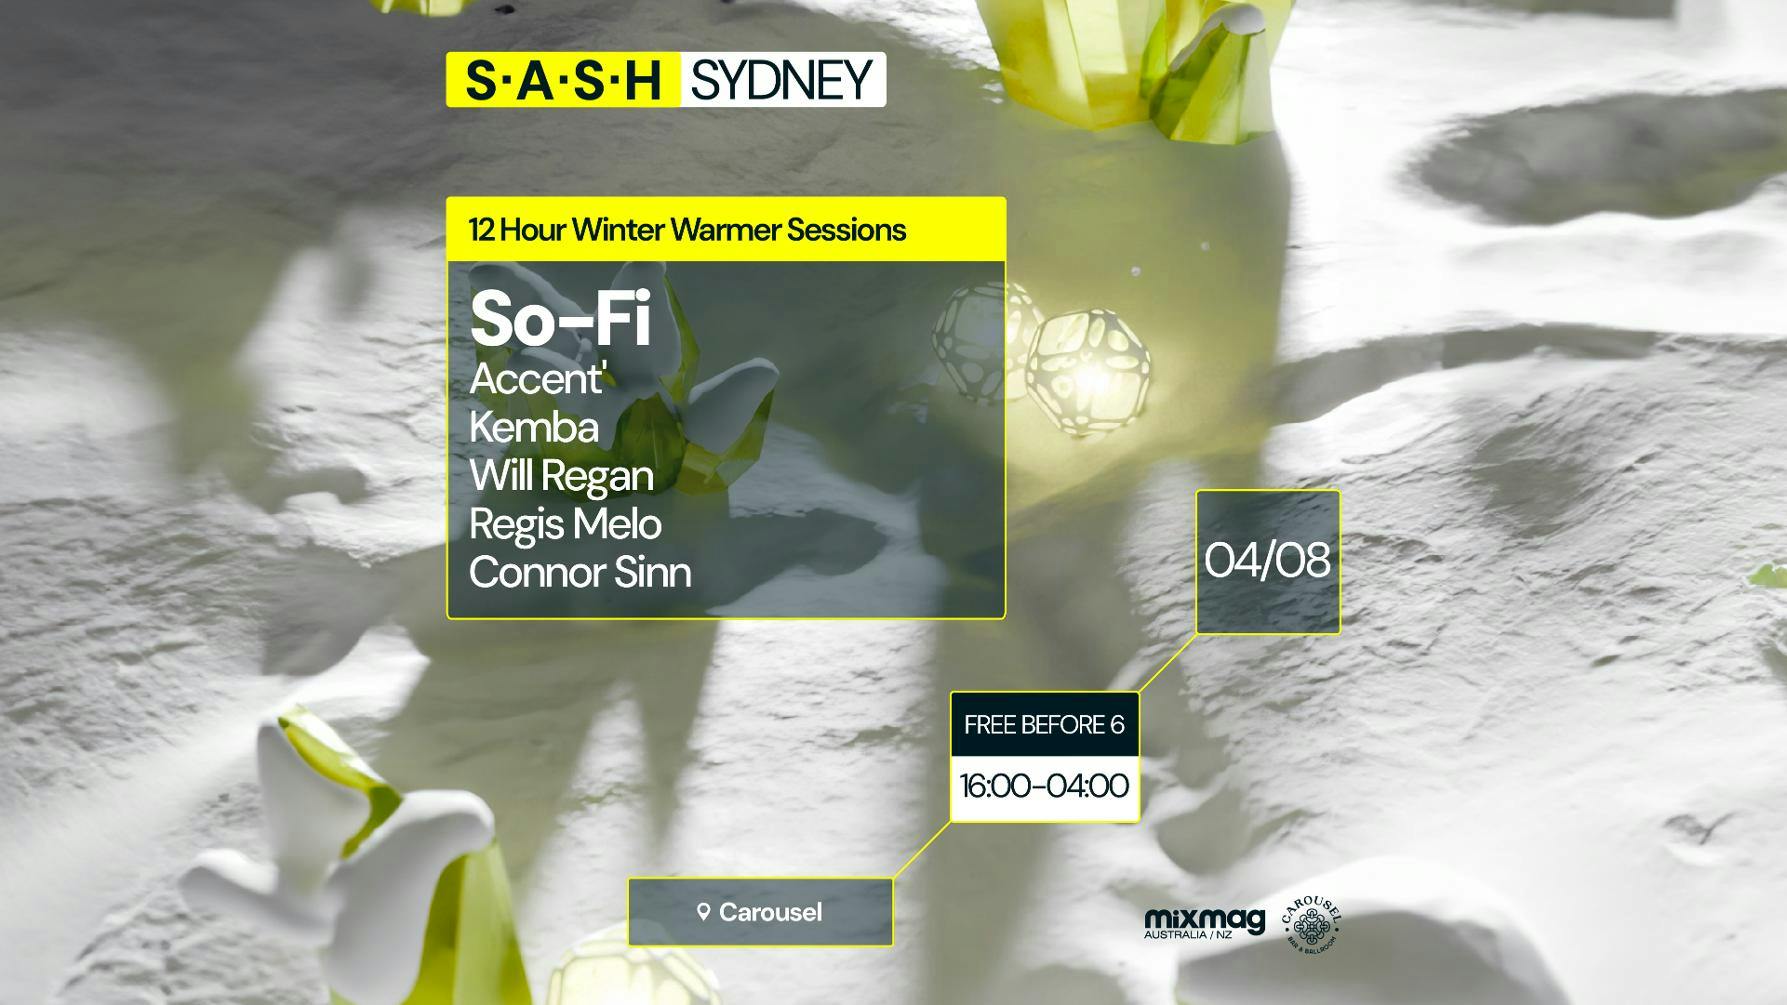 ★ S.A.S.H Sundays ★ Winter Warmer Sessions ★ So-Fi ★ Sunday August 4th ★